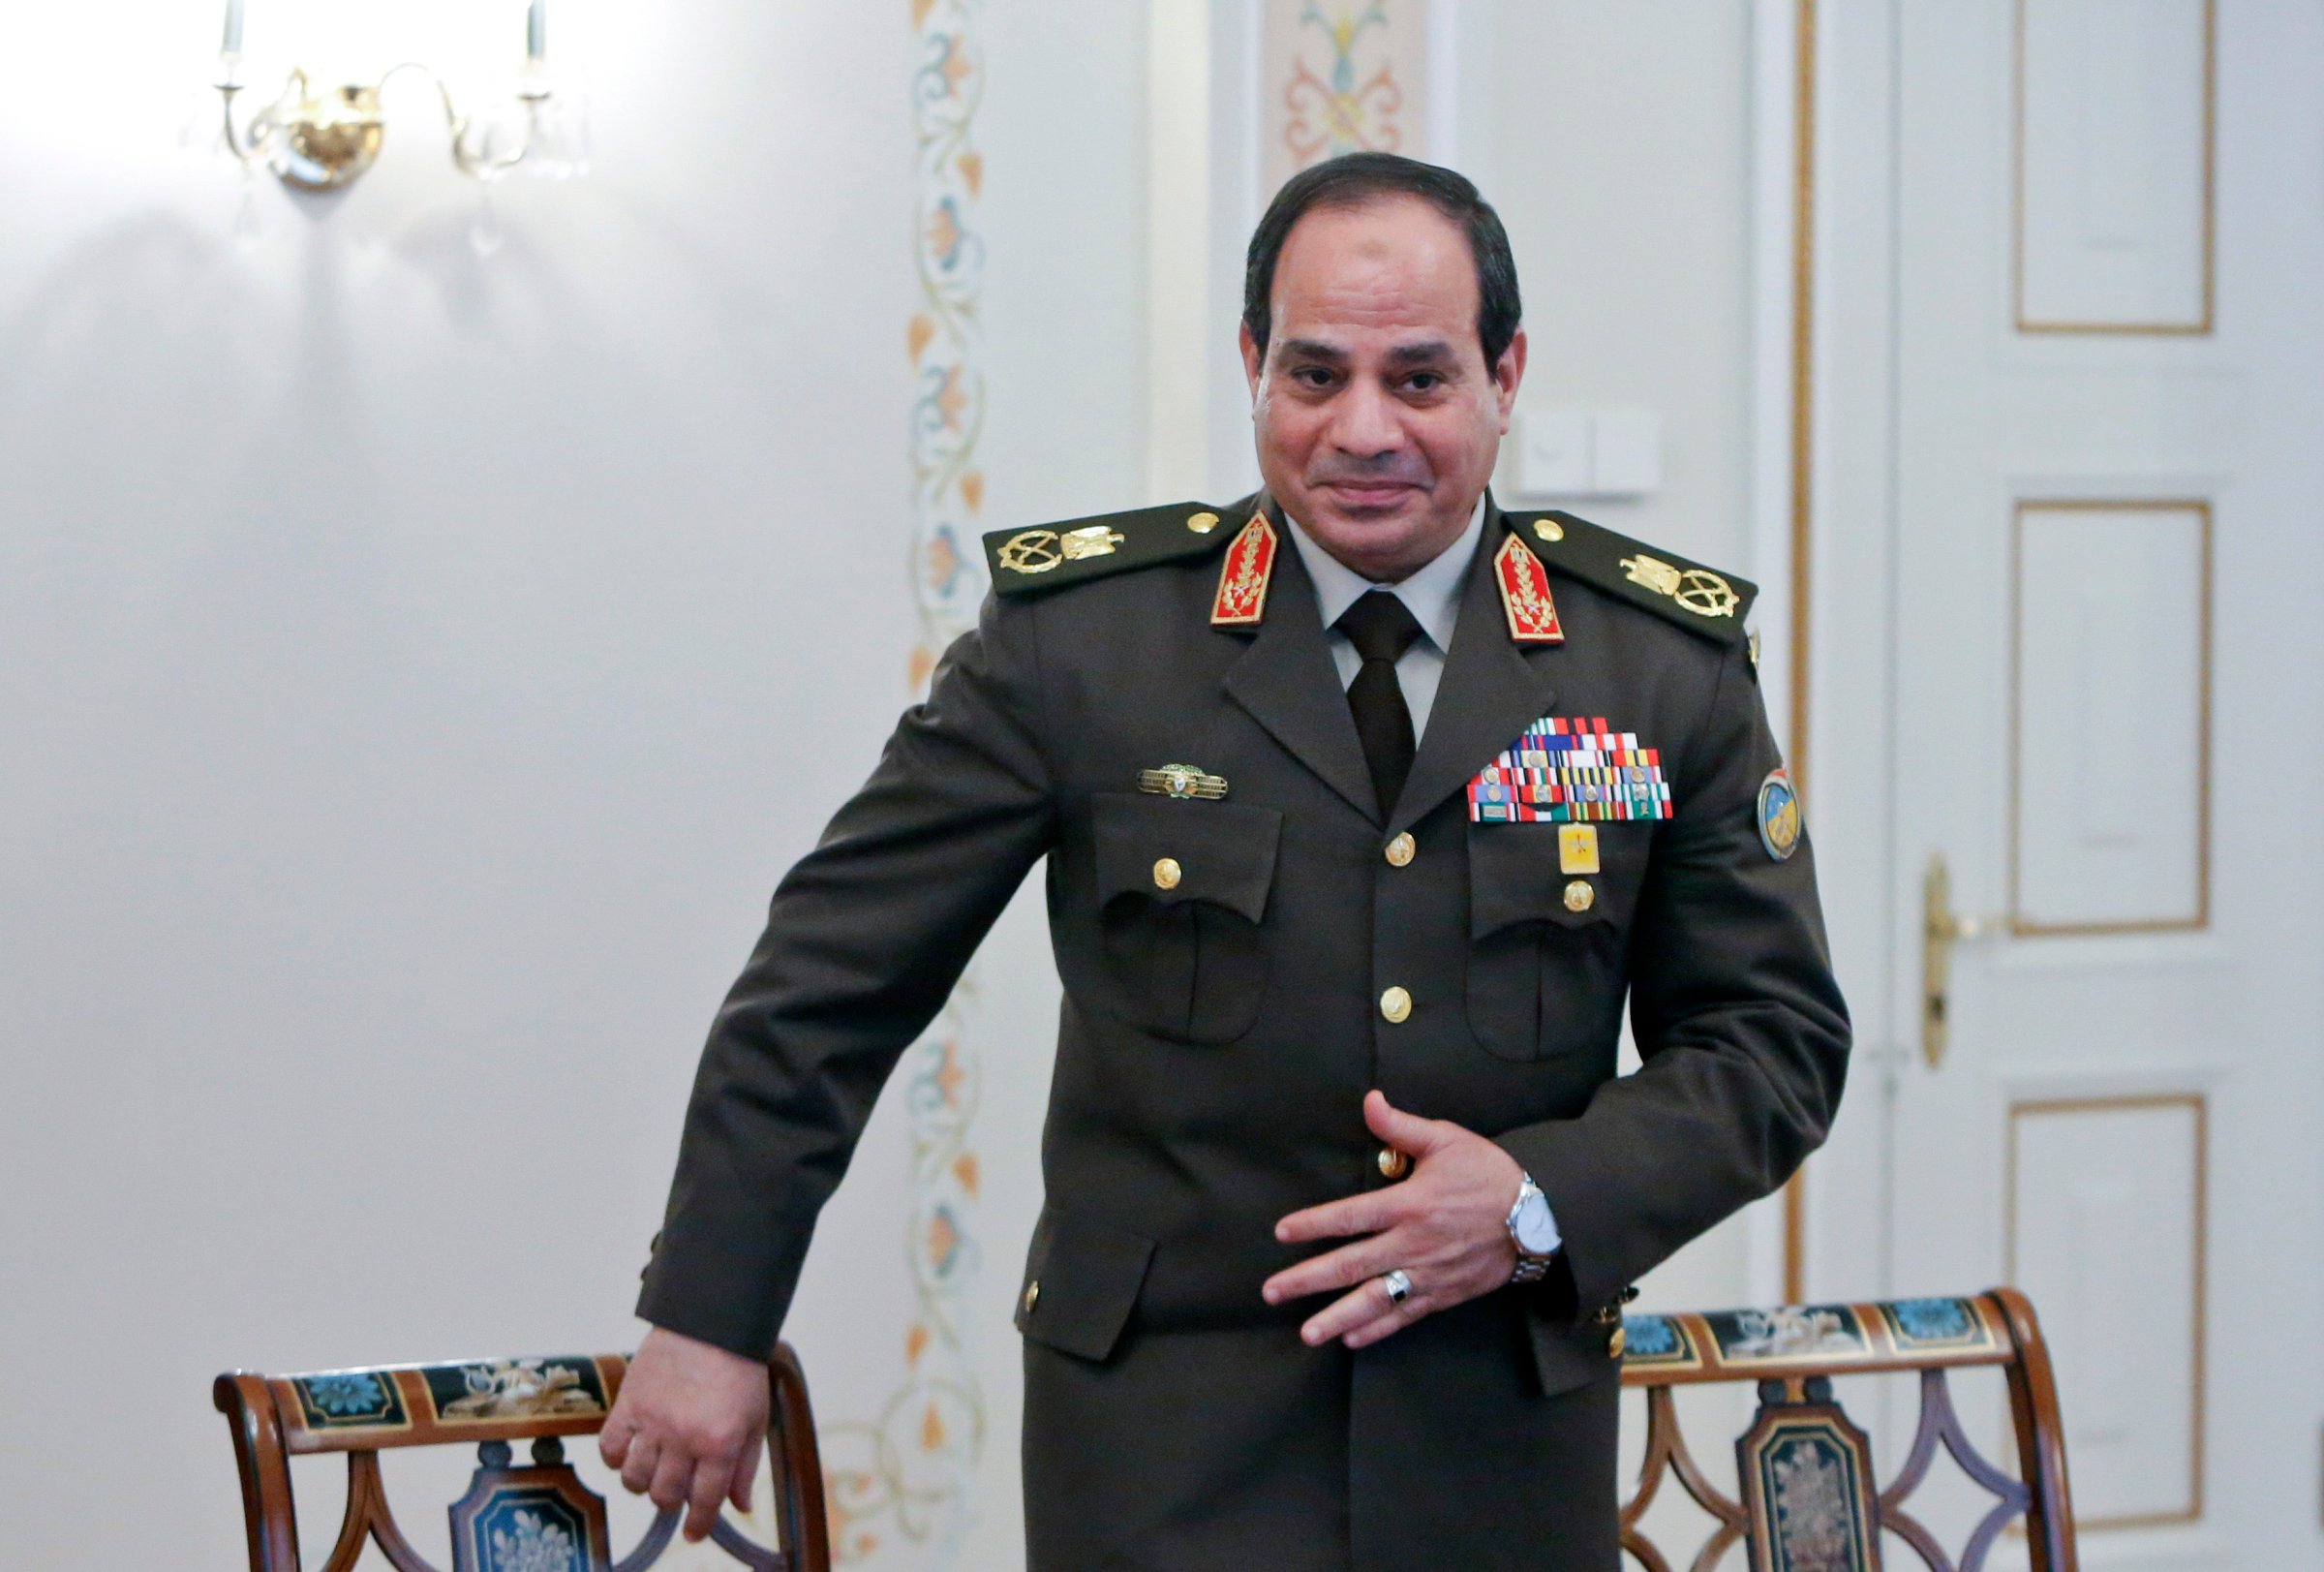 Egyptian Army chief Field Marshal al-Sisi arrives for a meeting with Russian President Putin at Novo-Ogaryovo